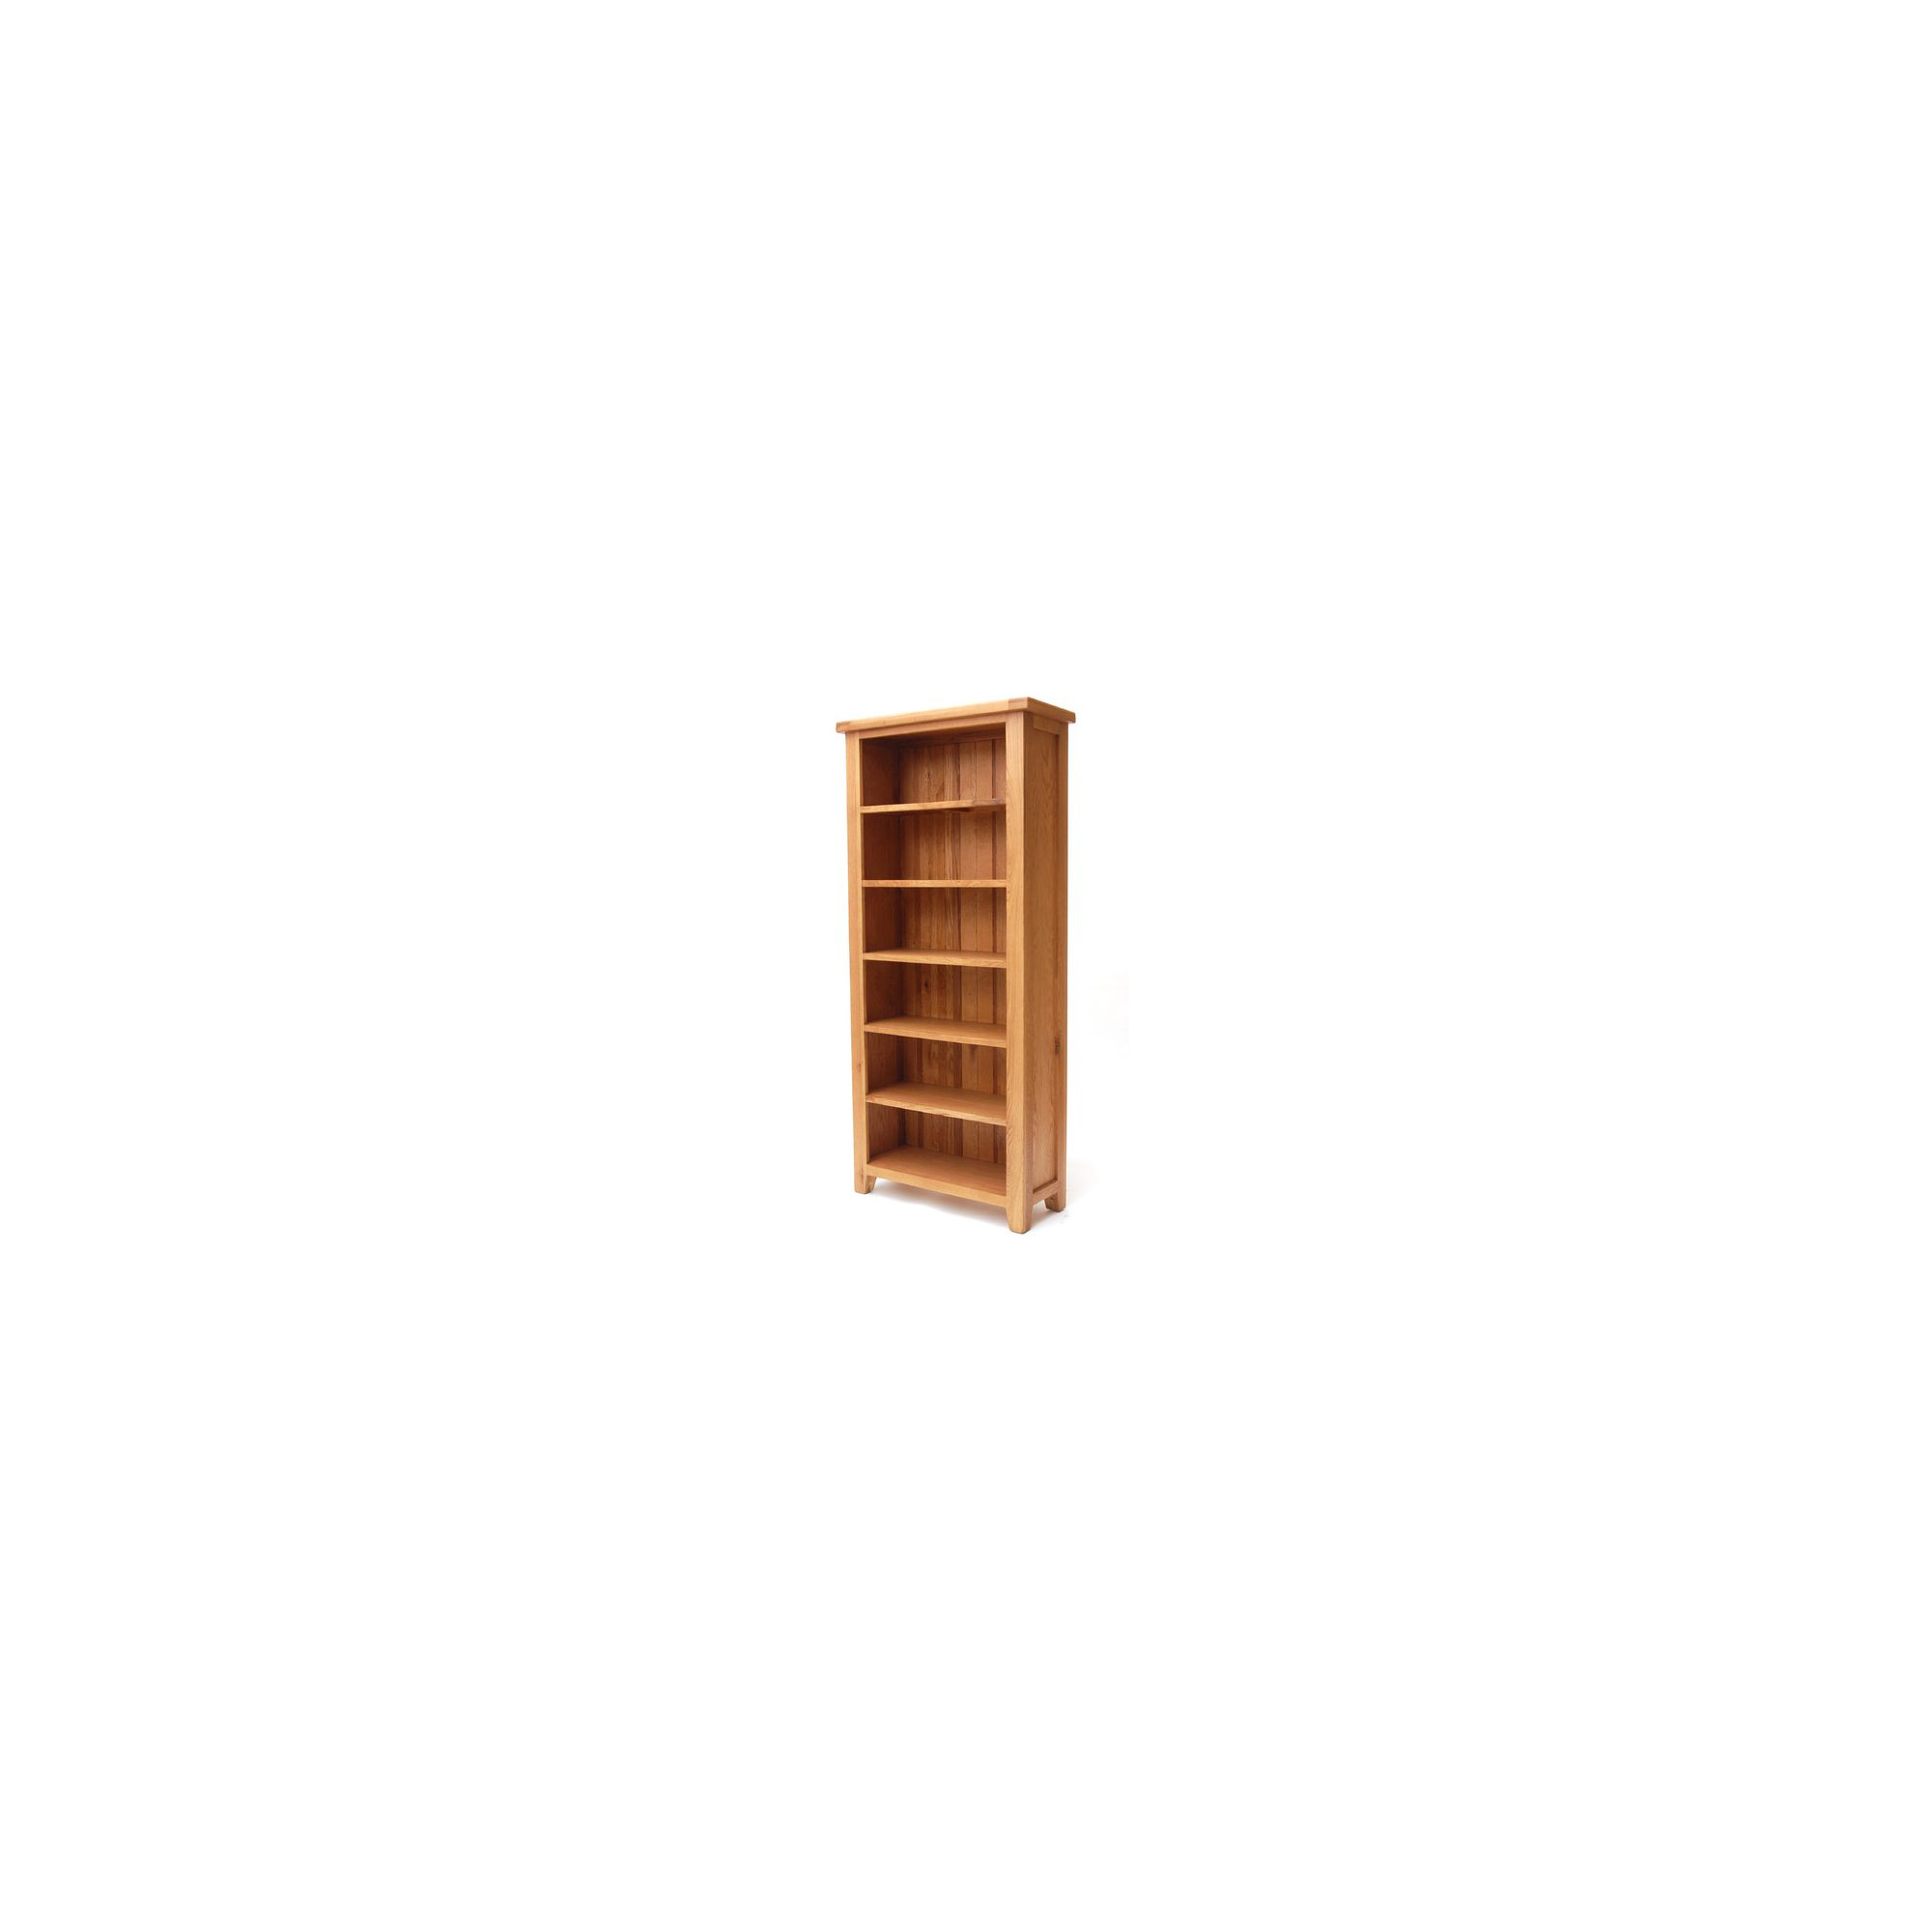 Furniture Link Hampshire Bookcase at Tesco Direct